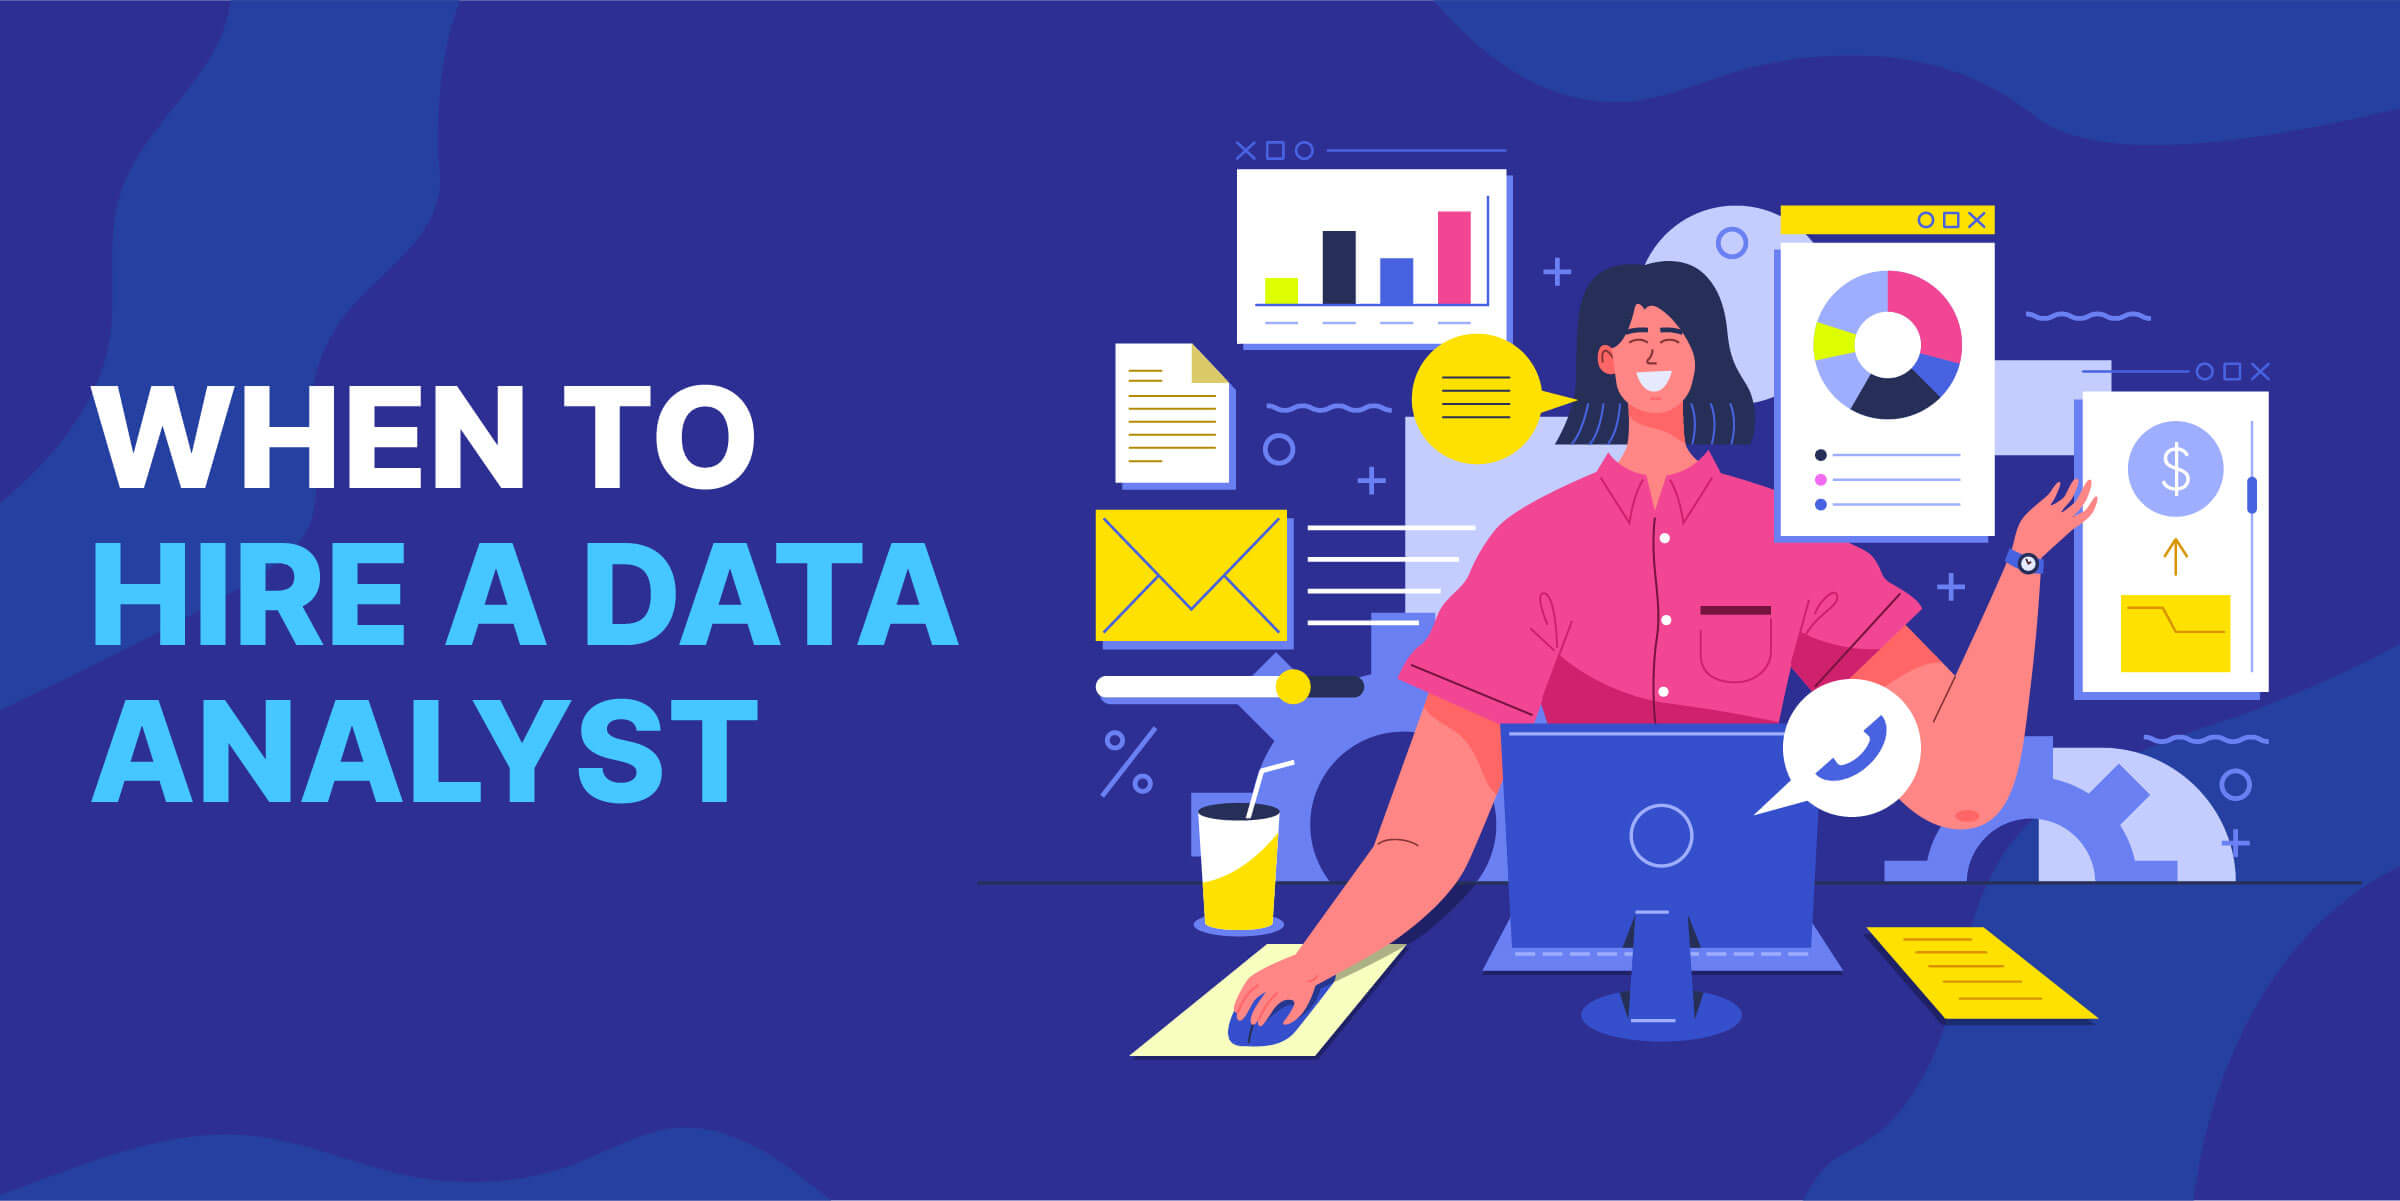 When to Hire a Data Analyst